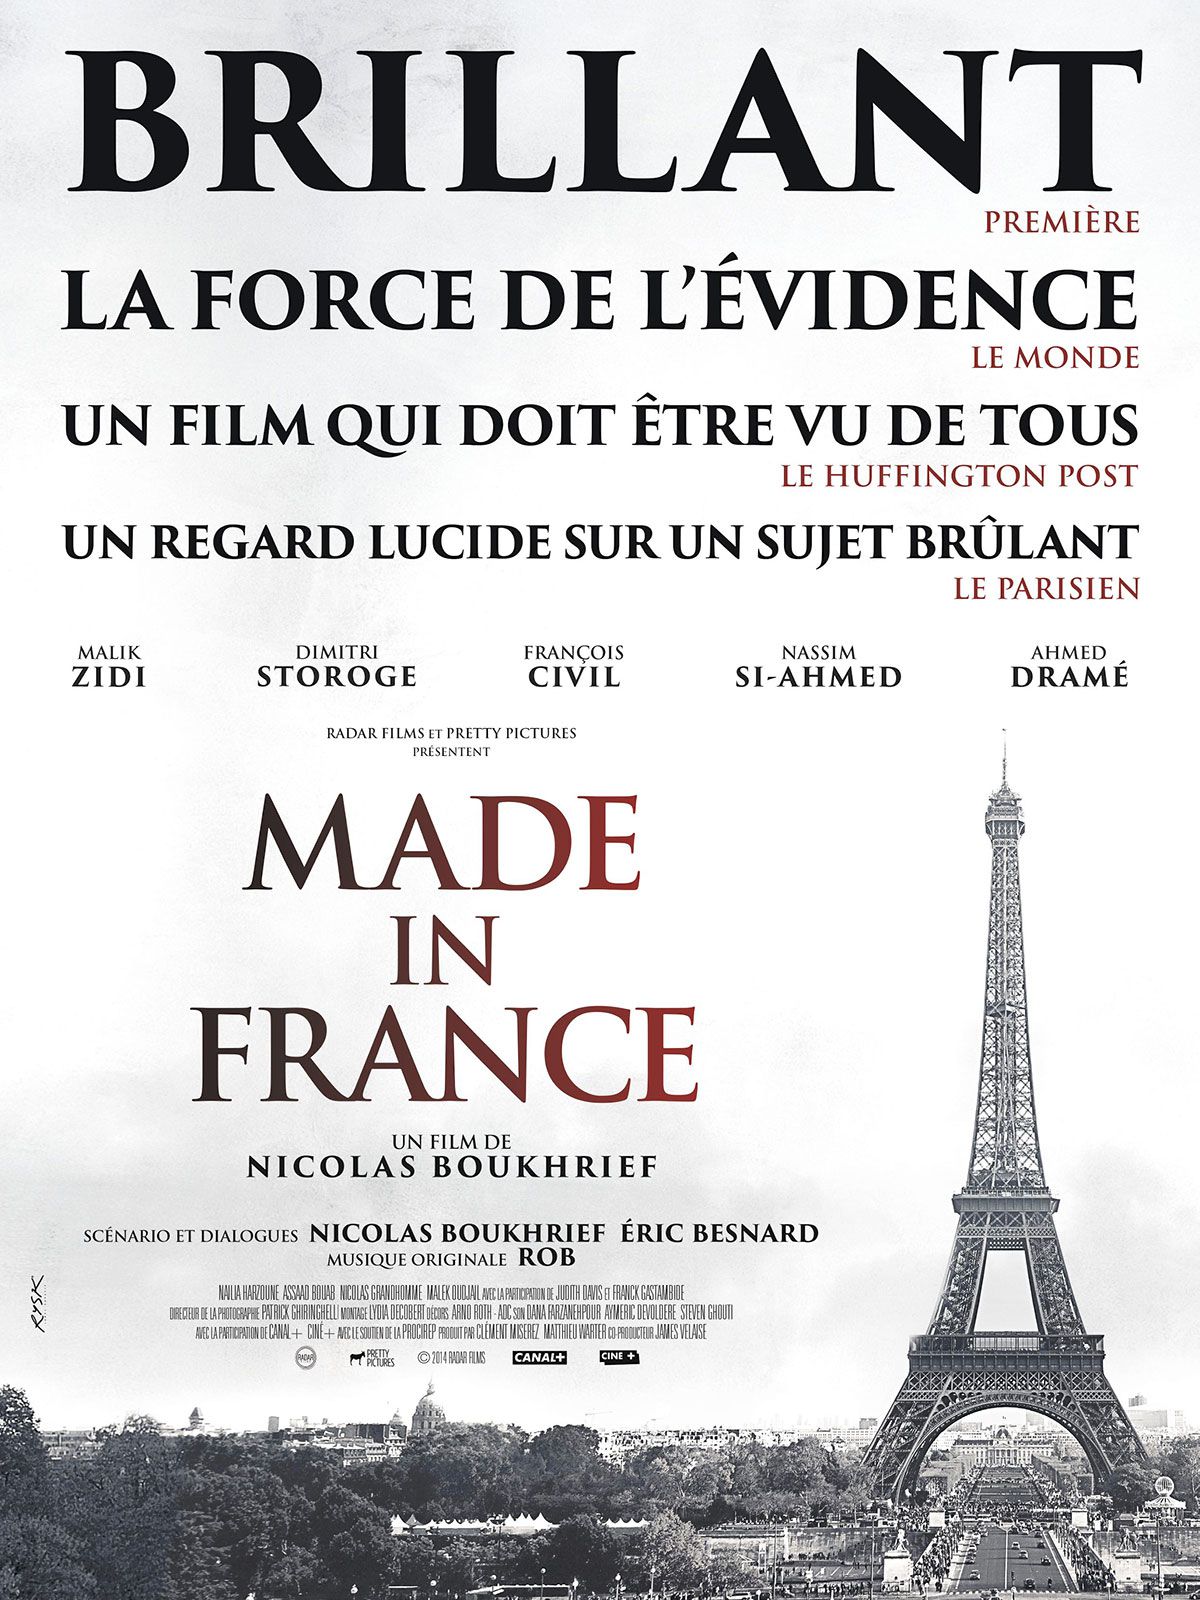 Made in France - Film (2016) streaming VF gratuit complet